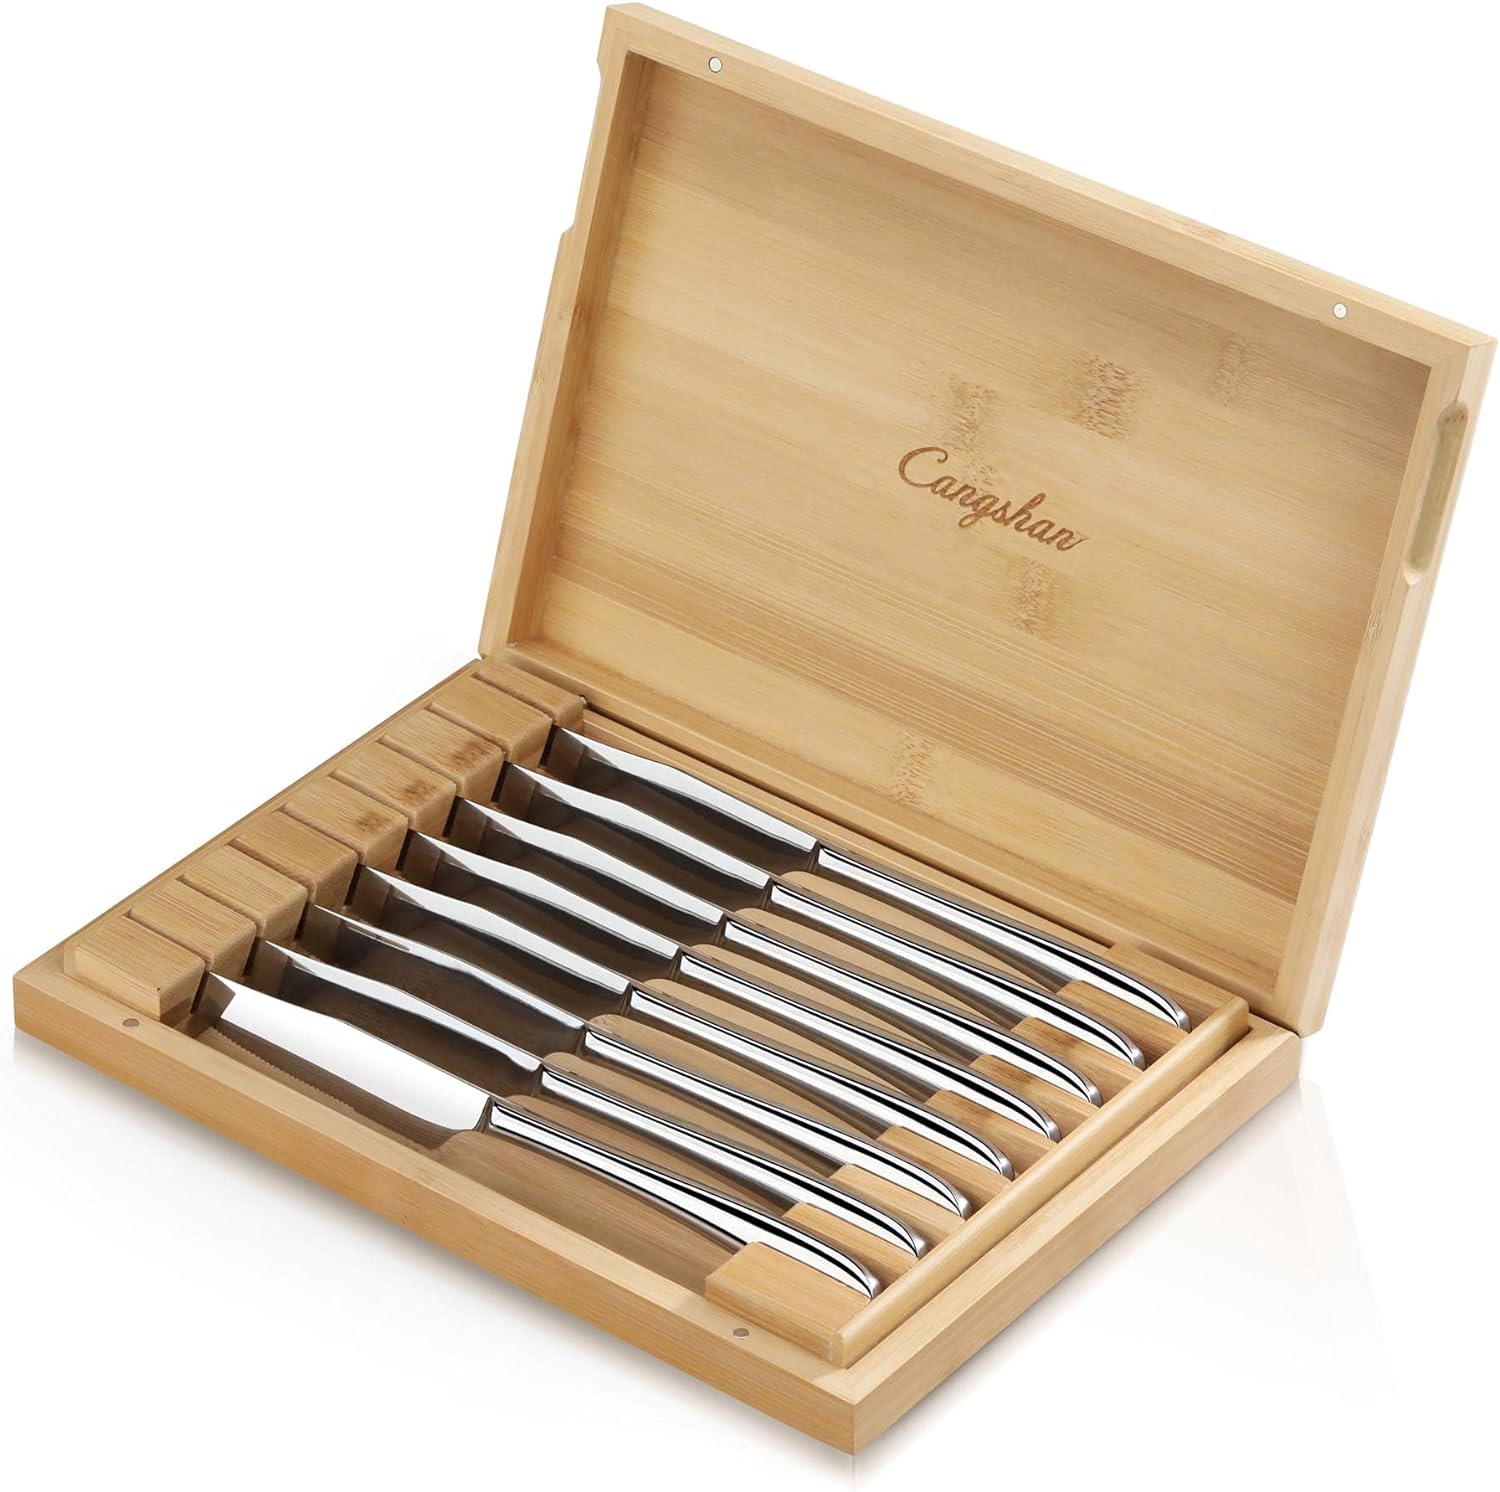 Cangshan 8pc Rain II Stainless Steel Steak Knife Set in Bamboo Chest Kitchen Knives 12041529